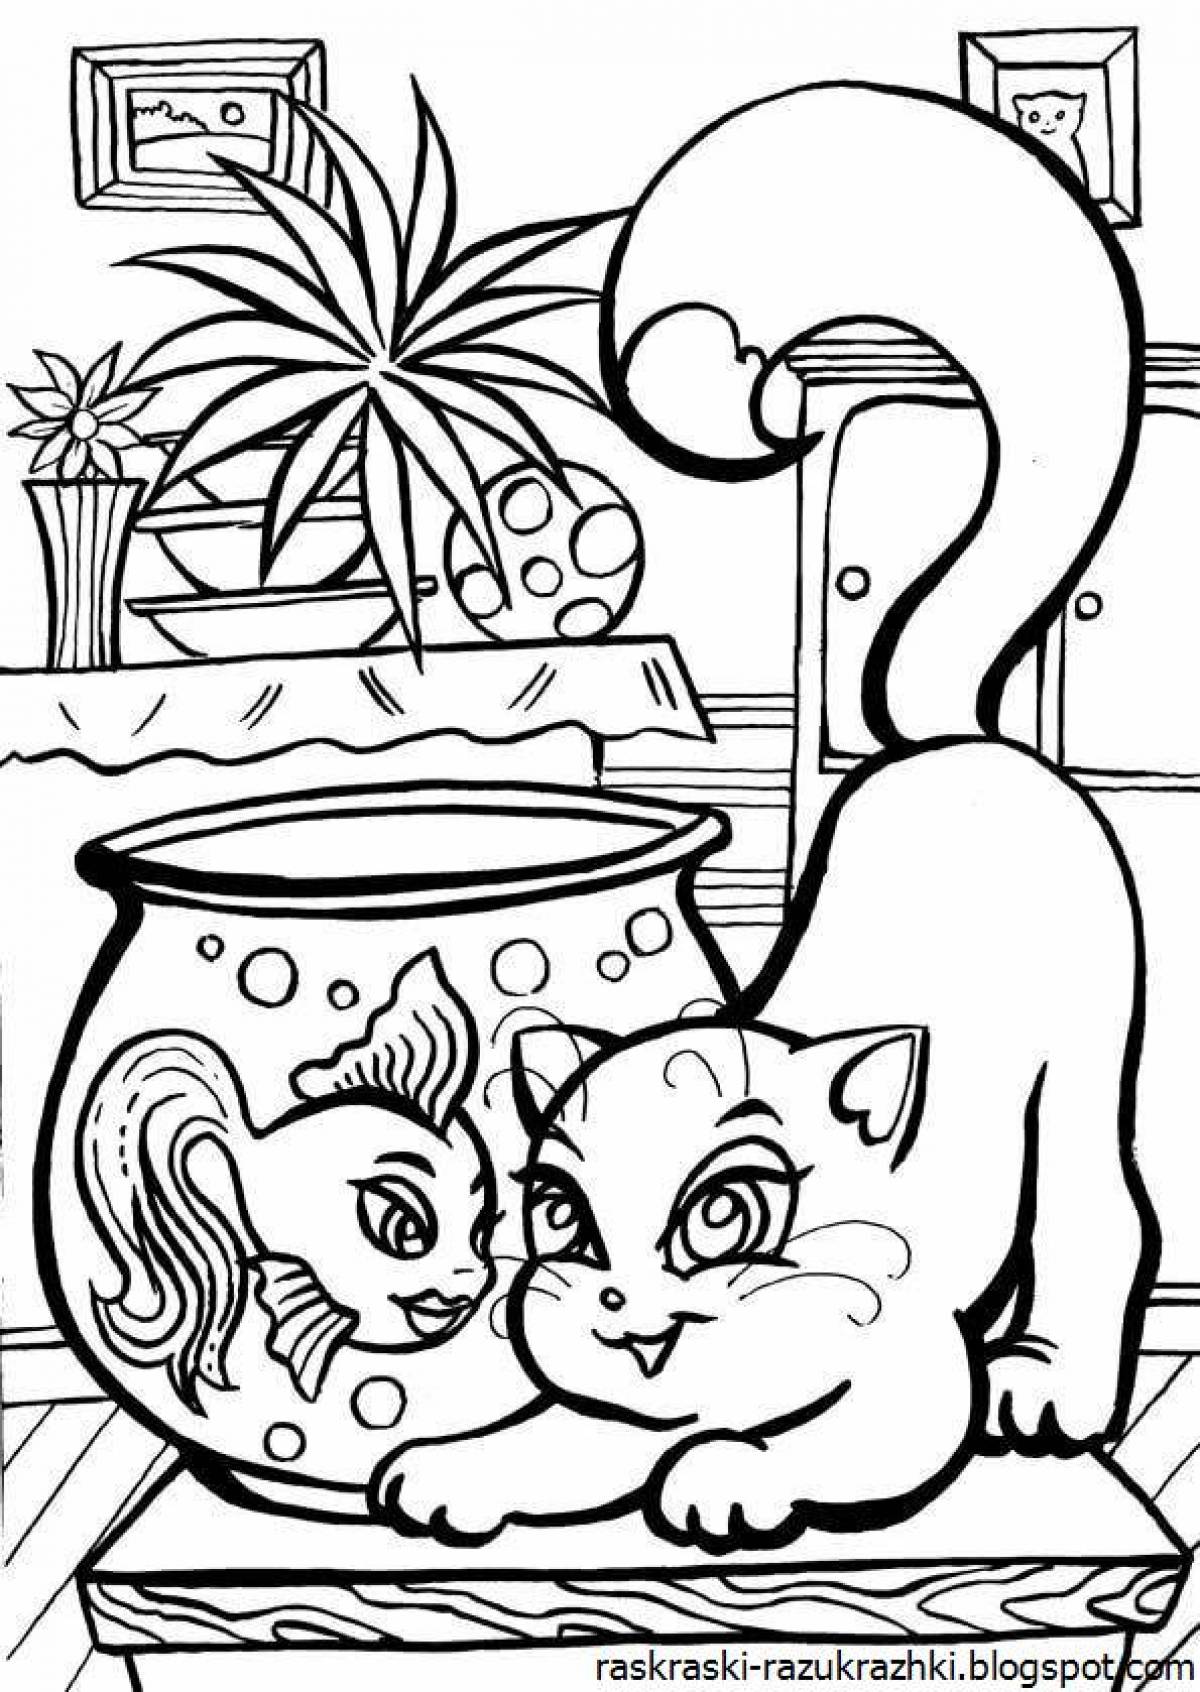 Soothing coloring book for kitty girls